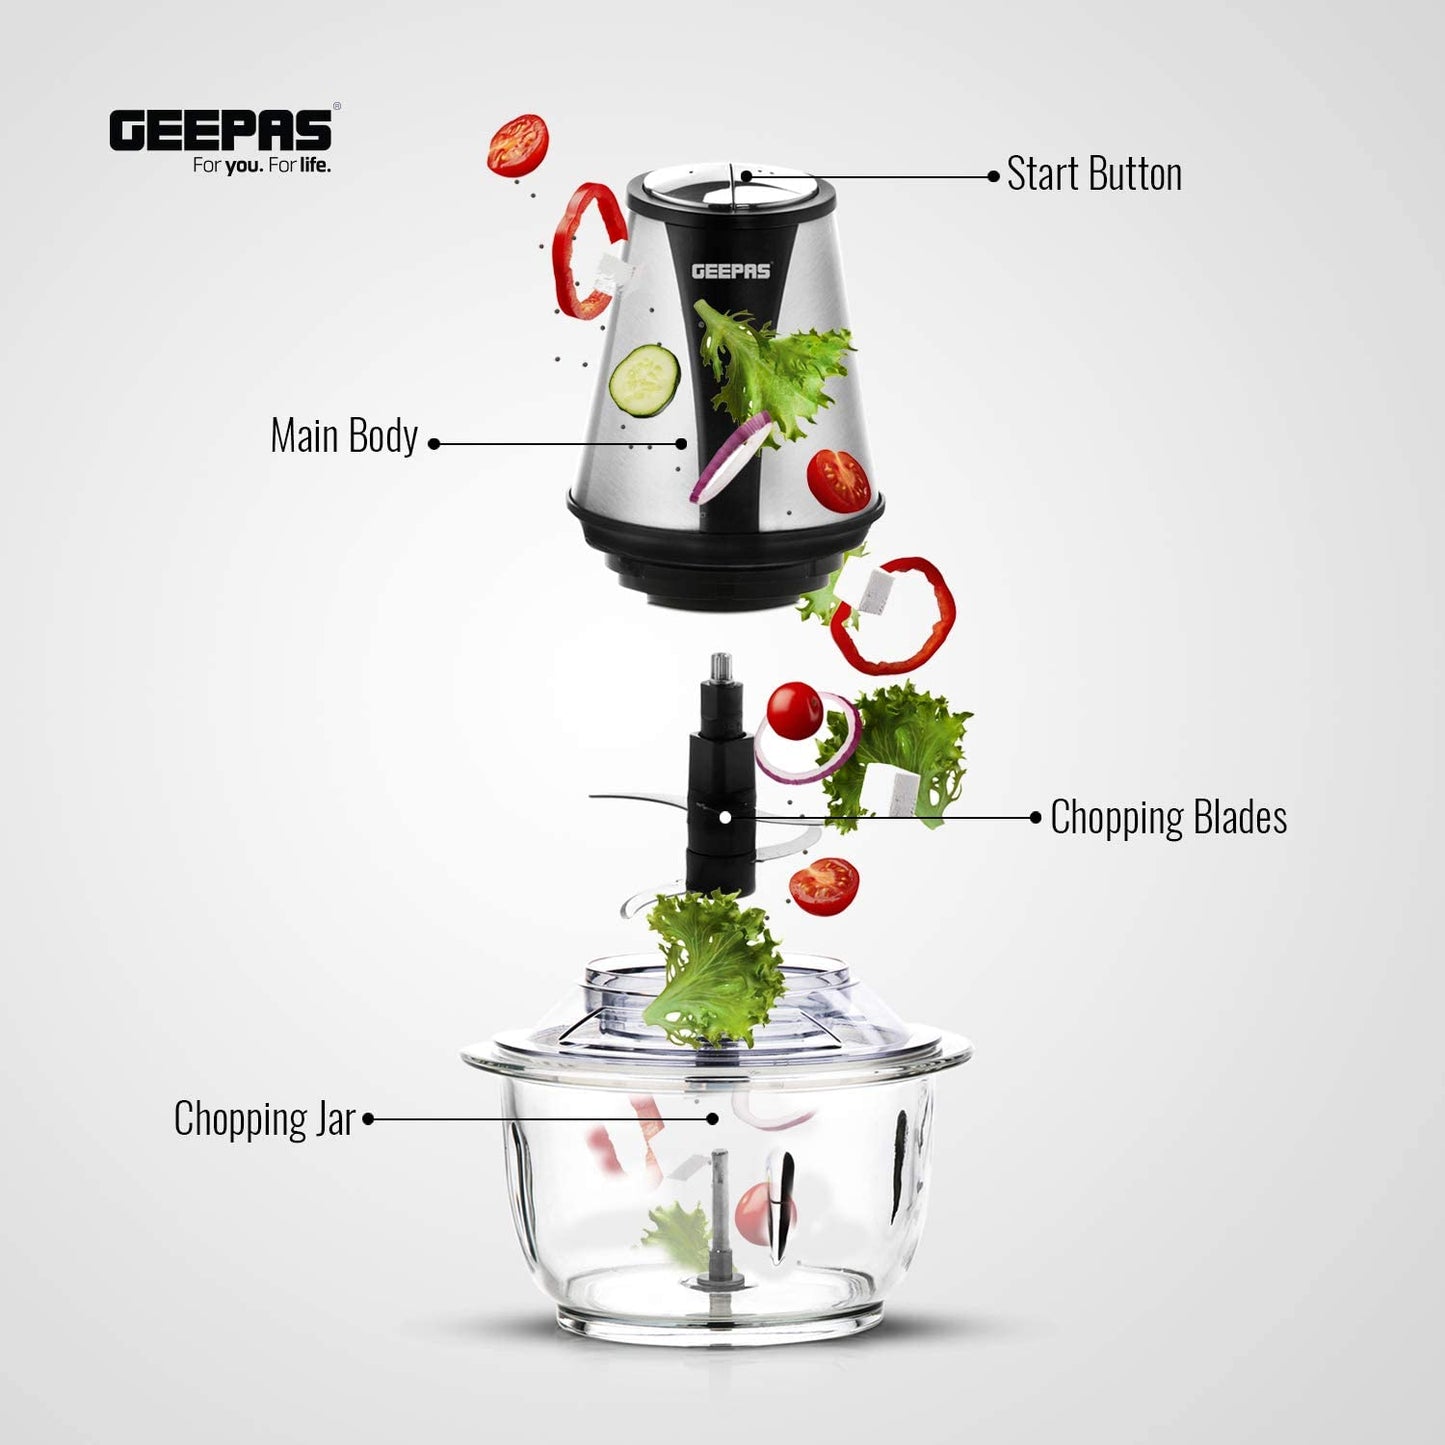 Geepas 400W Mini Food Processor | 1.2L Glass Jar Bowl & 4 Stainless Steel Blades, 2 Speed, Mini Food Chopper Shredder Perfect for Salads, Salsa, Guacamole, Pesto, Curry Pastes & More - 2 Year Warranty